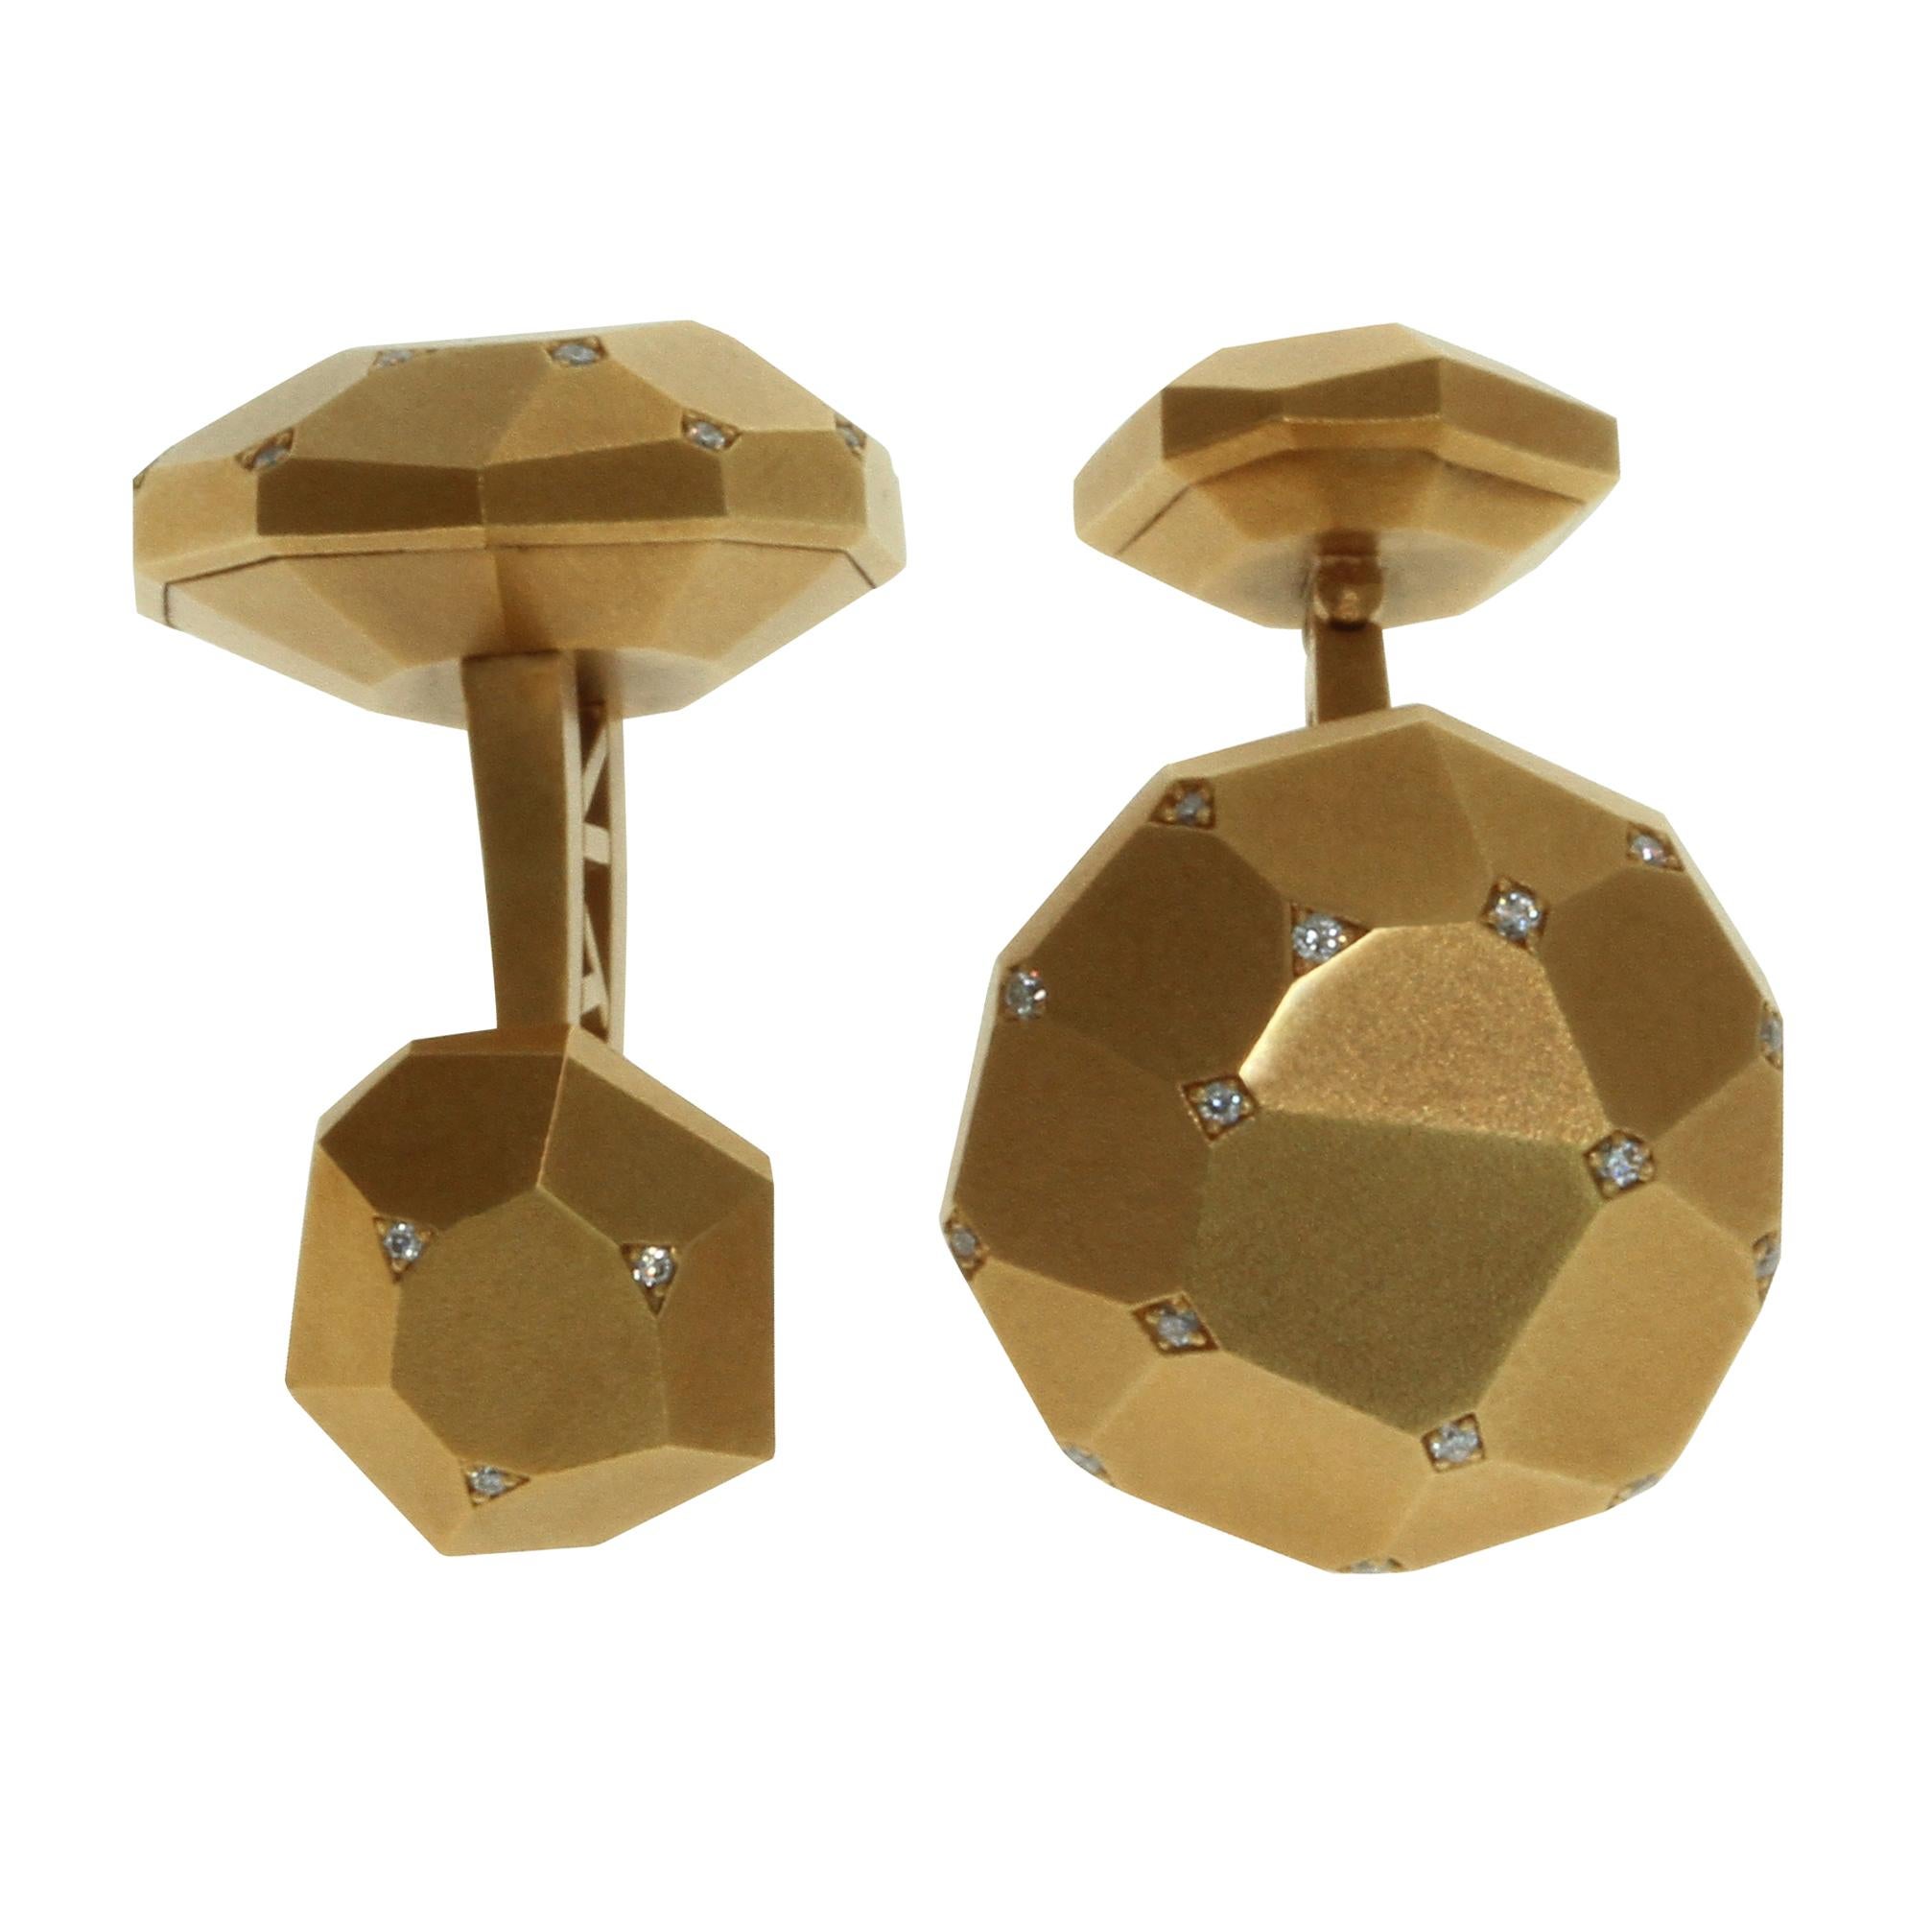 Diamond 18 Karat Yellow Gold Geometry Cufflinks

Bold, Strong, Masculine... And in the same time very Stylish cufflinks. From our Geometry Collection - just pure triumph of design. With matt finishing looks very reserved.
No more words, just check